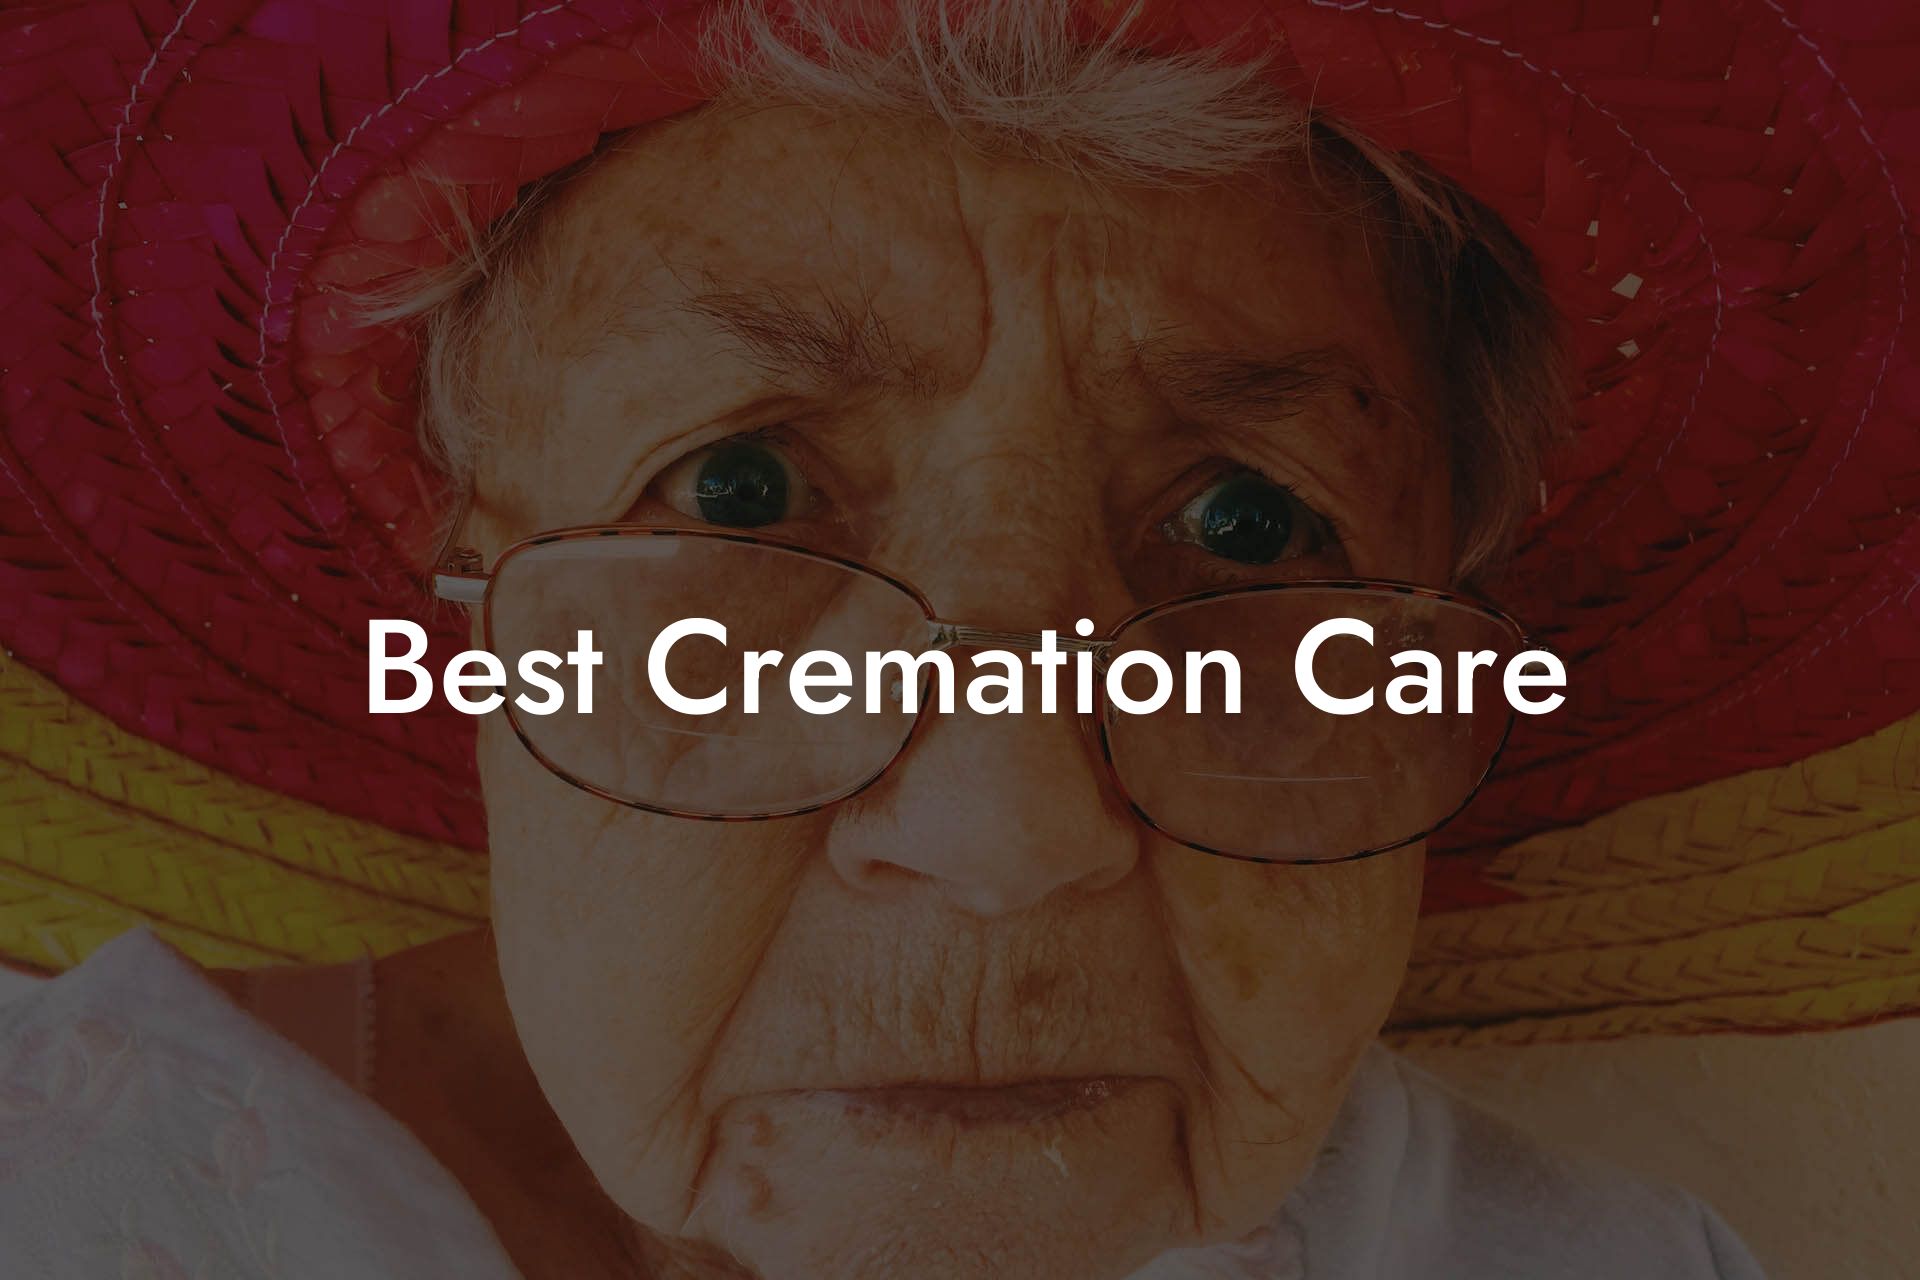 Best Cremation Care